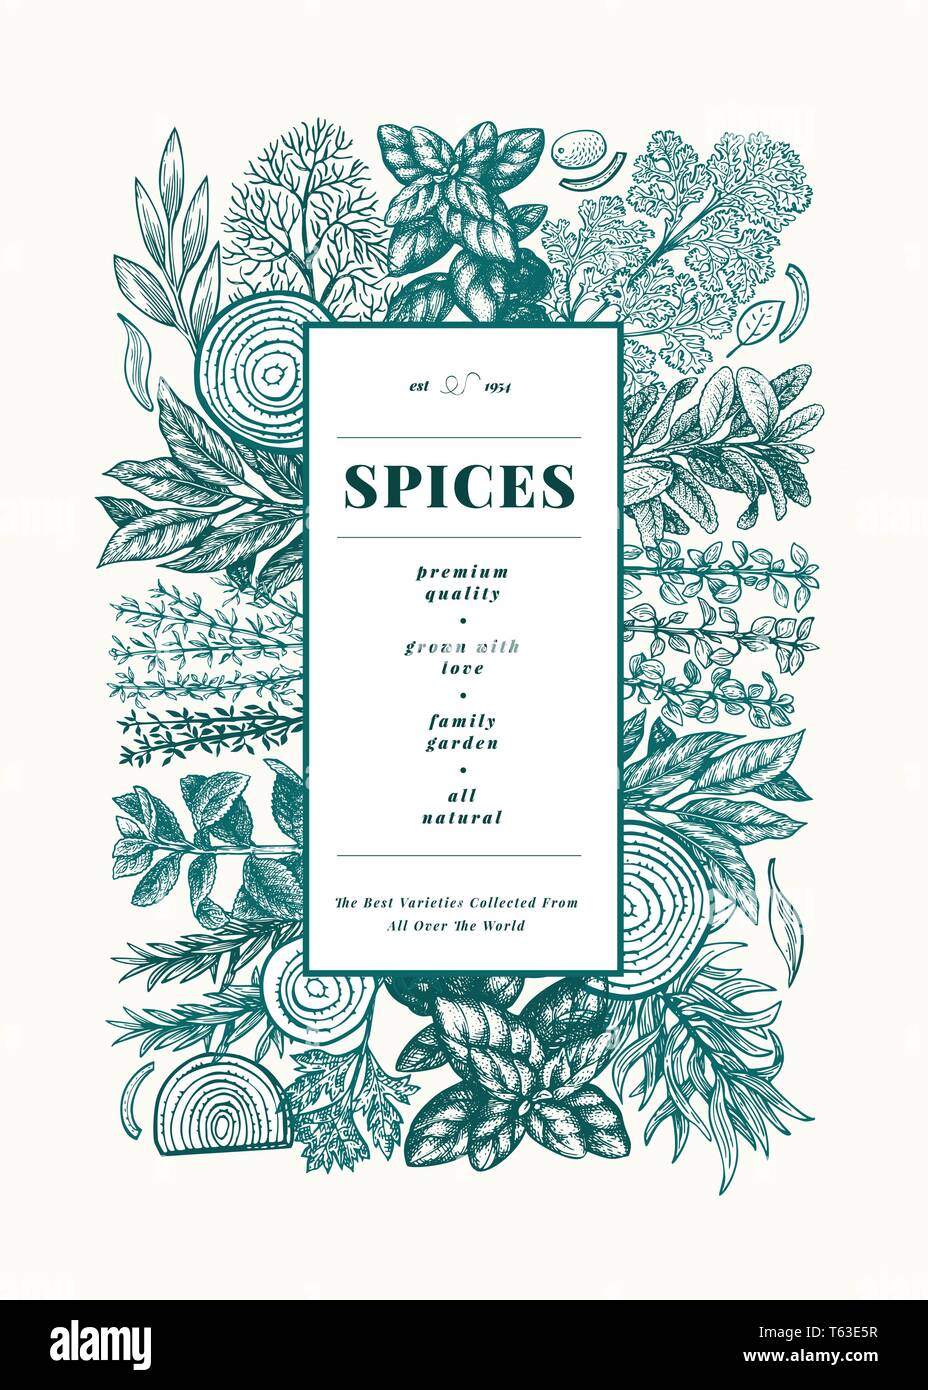 Culinary herbs and spices banner template. Hand drawn retro botanical illustration. Vector background for design menu, packaging, recipes, label, farm Stock Vector